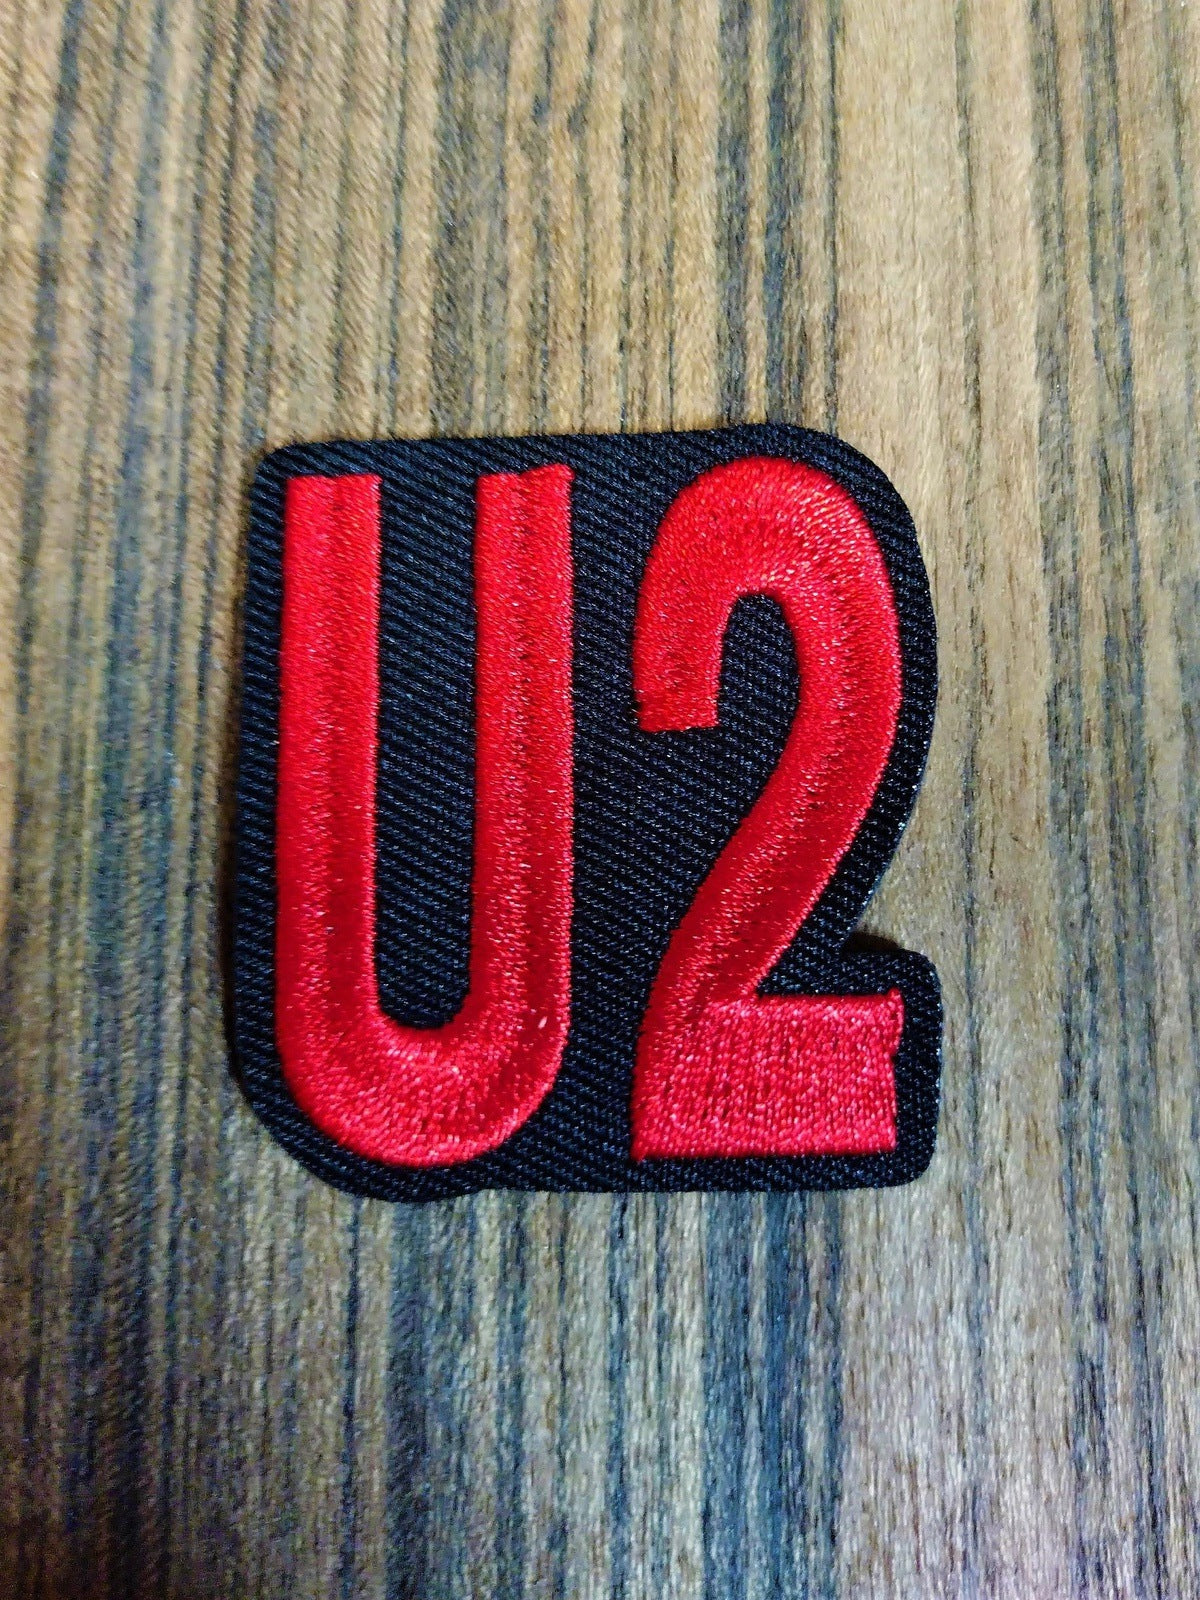 U2 Patch approx. 2 inches X 2 inches